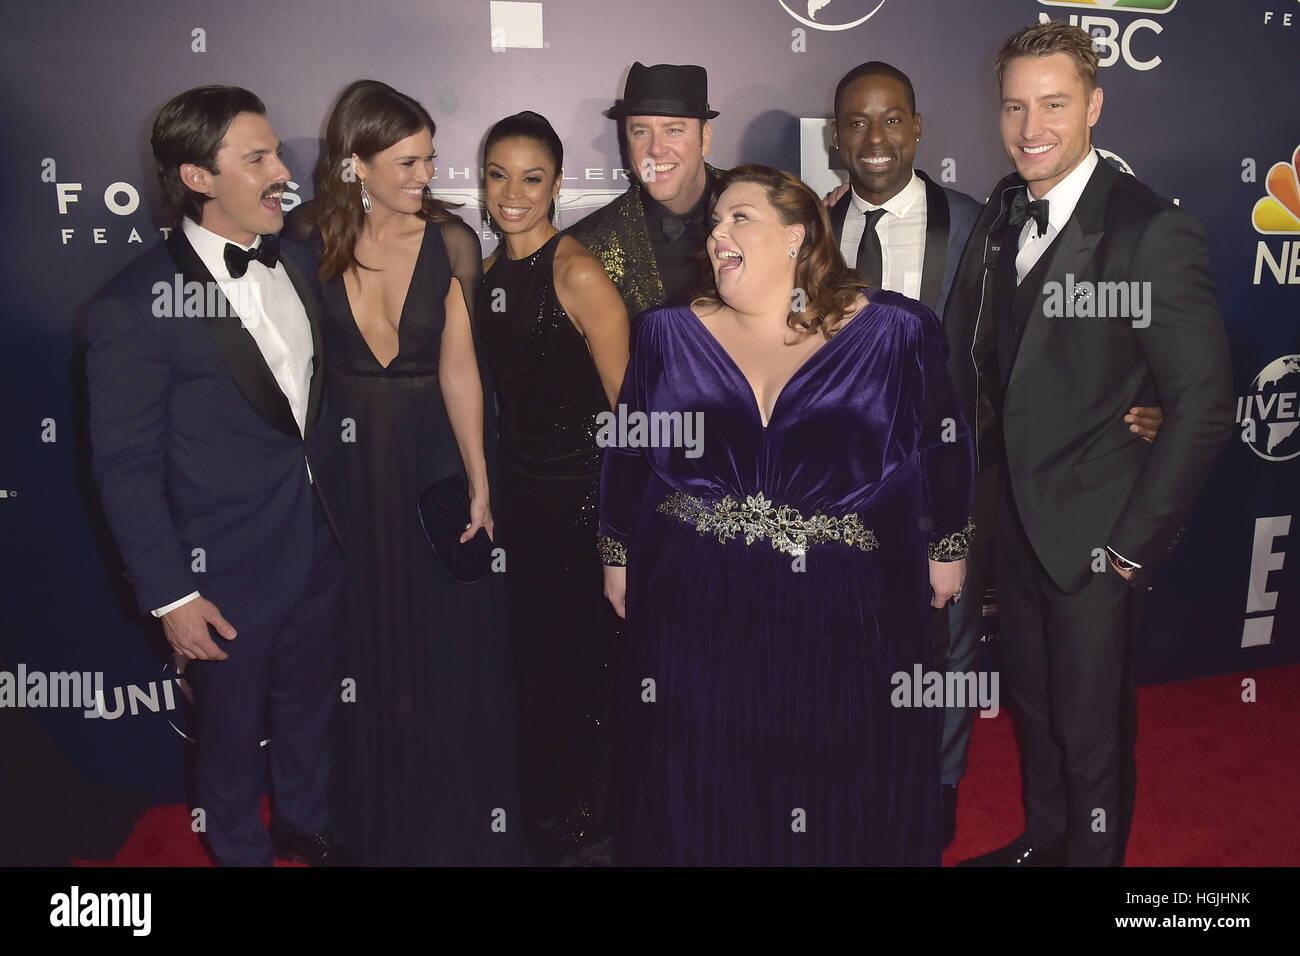 Beverly Hills, California, USA. 8th Jan, 2017. Milo Ventimiglia, Mandy Moore, Chris Sullivan, Susan Kelechi Watson, Chrissy Metz, Sterling K. Brown and Justin Hartley attend the NBC Universal's 74th Annual Golden Globes After Party at Beverly Hilton Hotel on January 8, 2017 in Beverly Hills, California, USA. | Verwendung weltweit/picture alliance © dpa/Alamy Live News Stock Photo